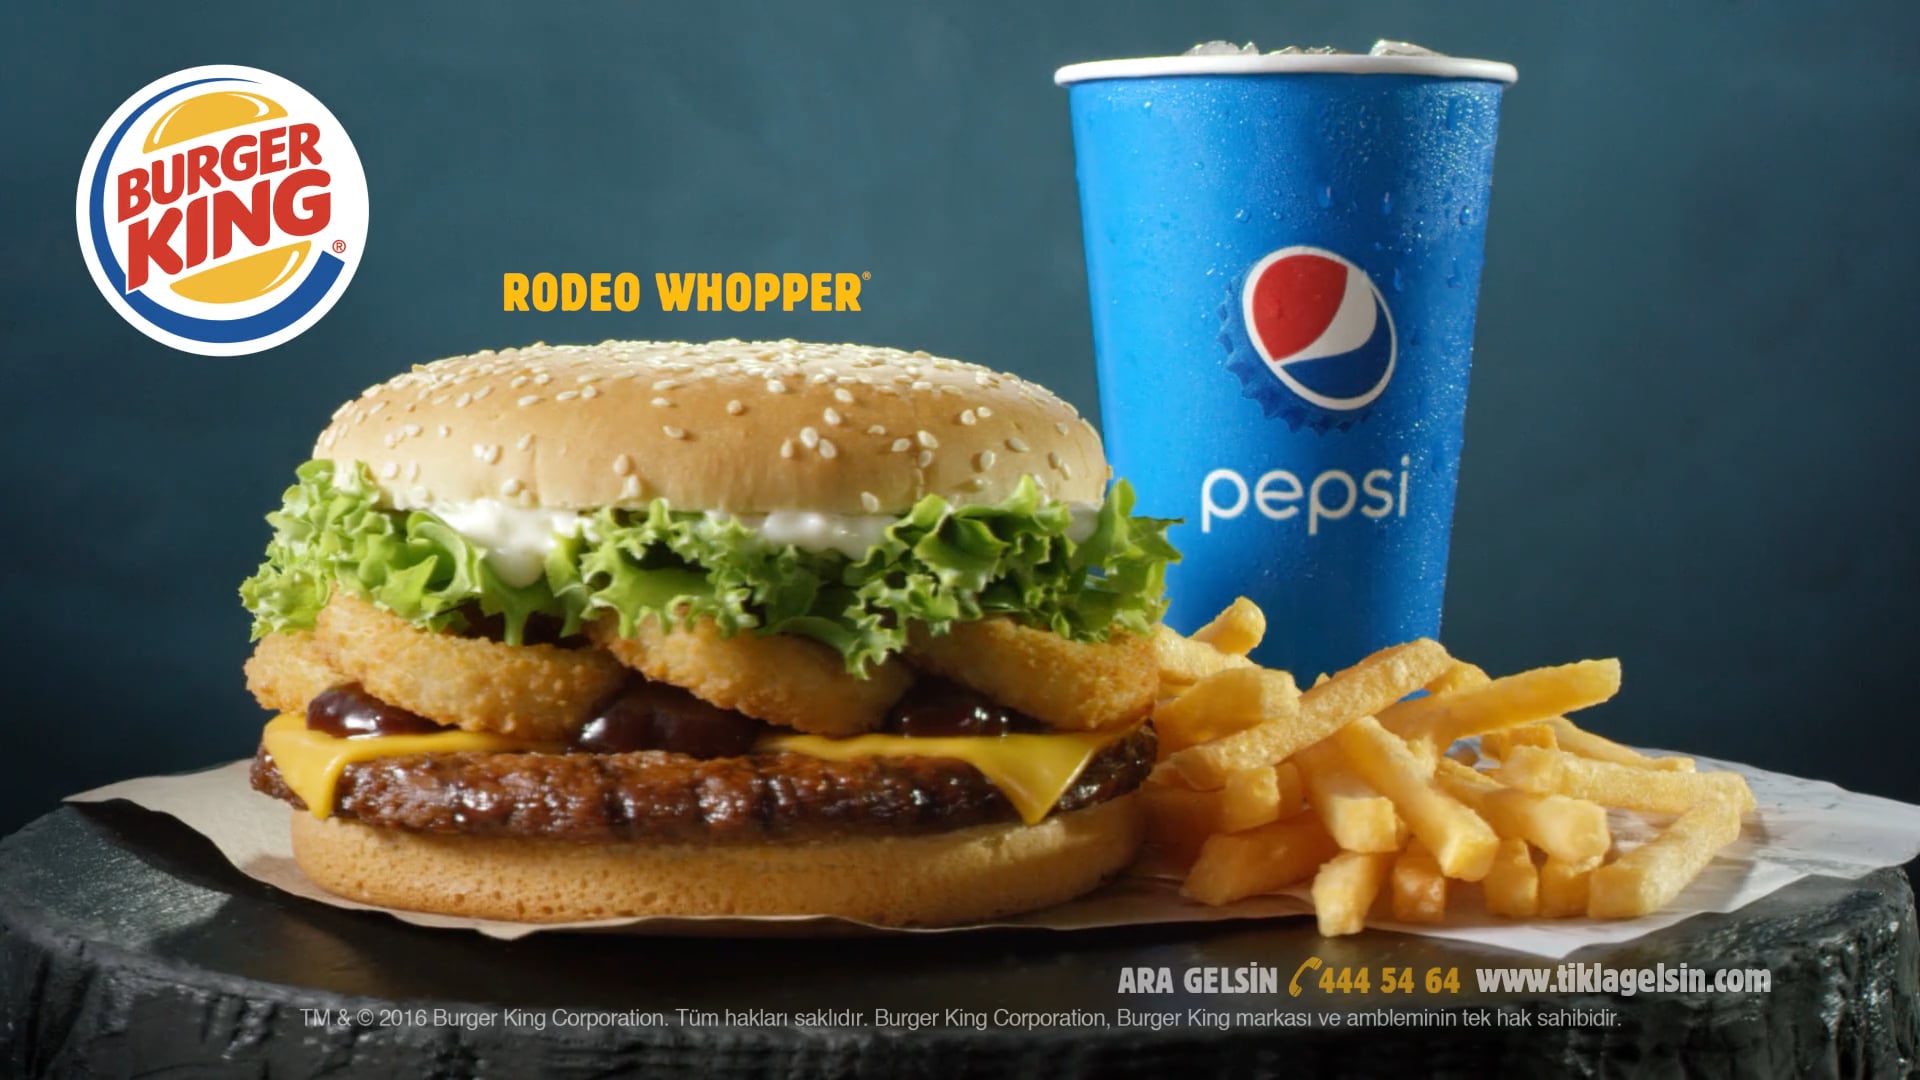 BURGER KING Rodeo Whooper.